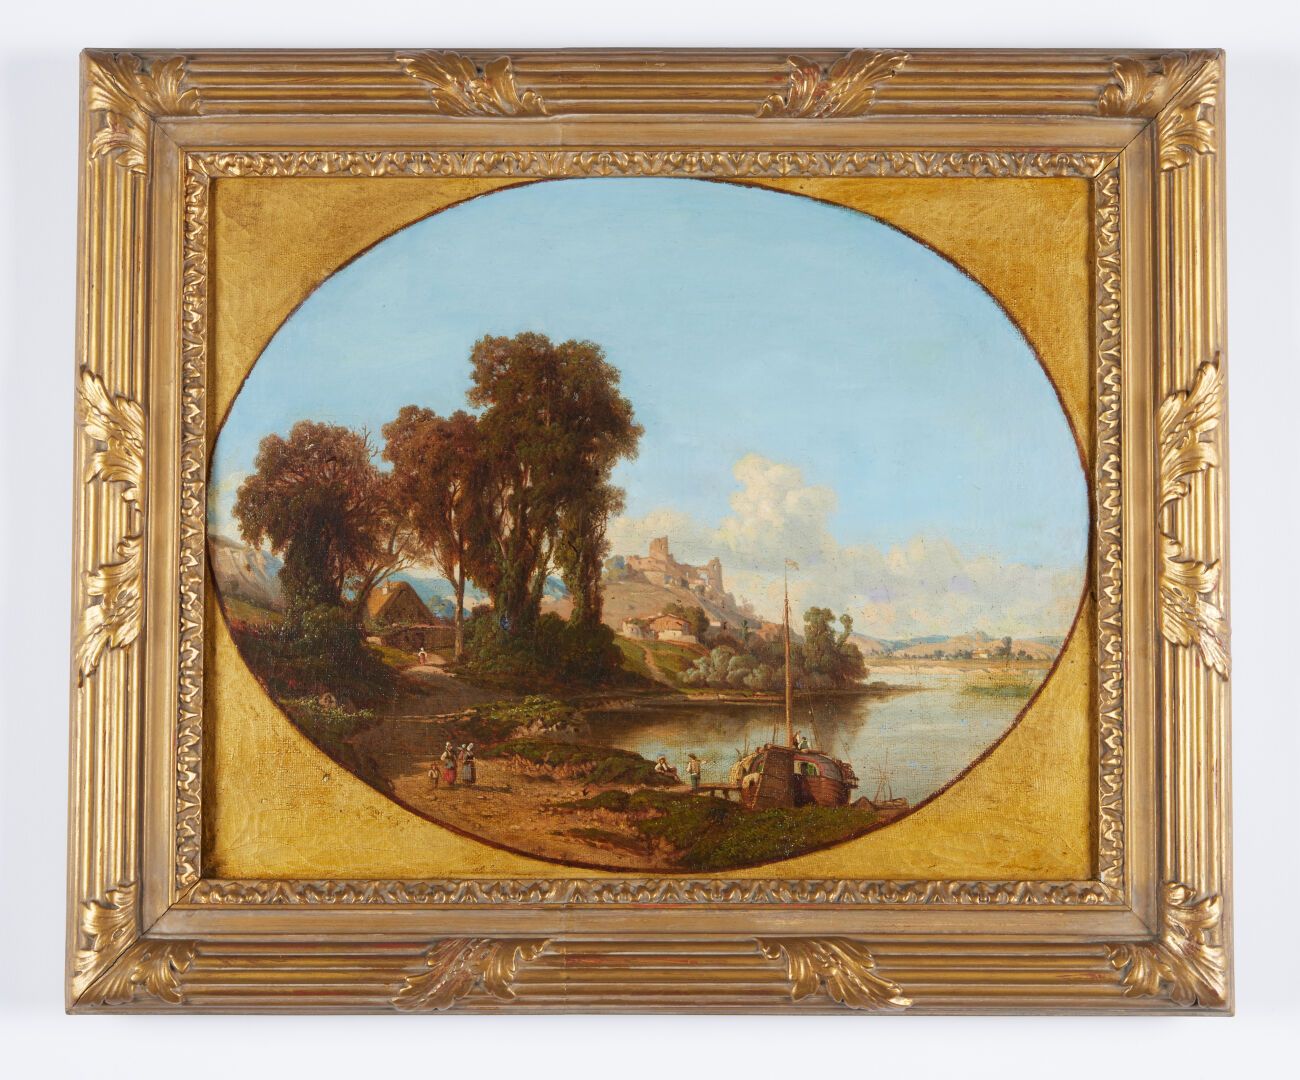 Null 19th CENTURY SCHOOL

"Landscape with a lake and characters". 

Oil on canva&hellip;